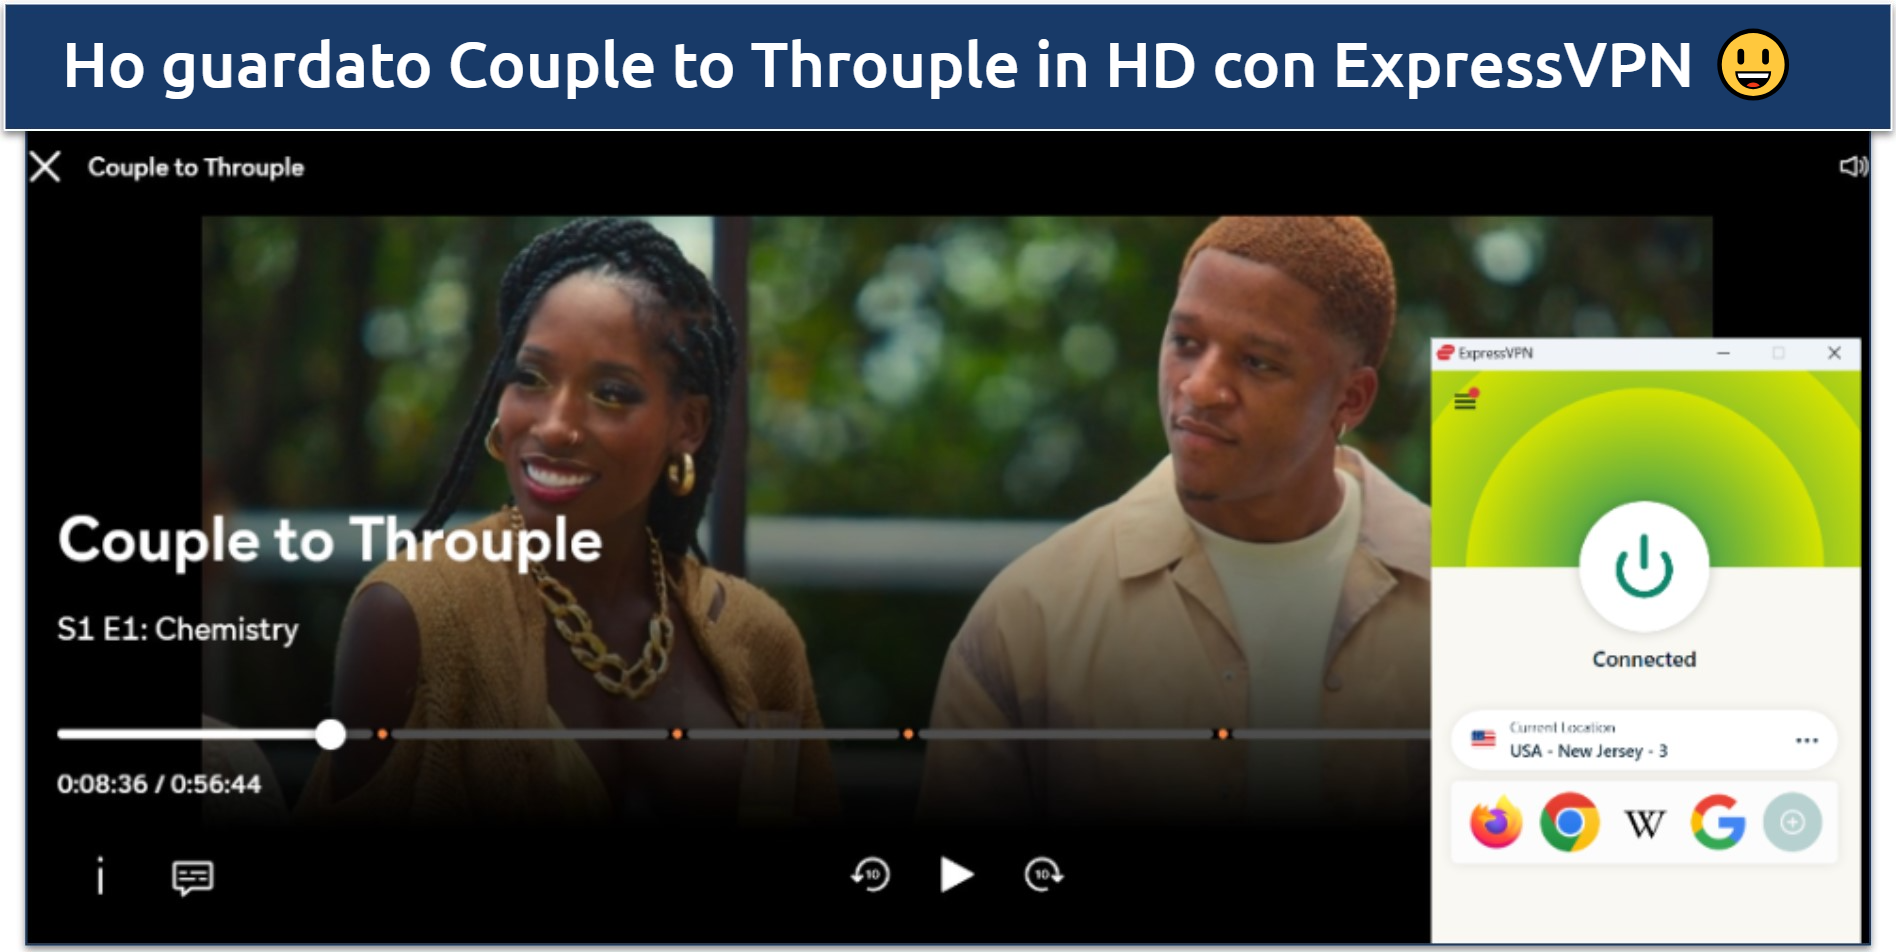 A screenshot of Couple to Throuple streaming with ExpressVPN